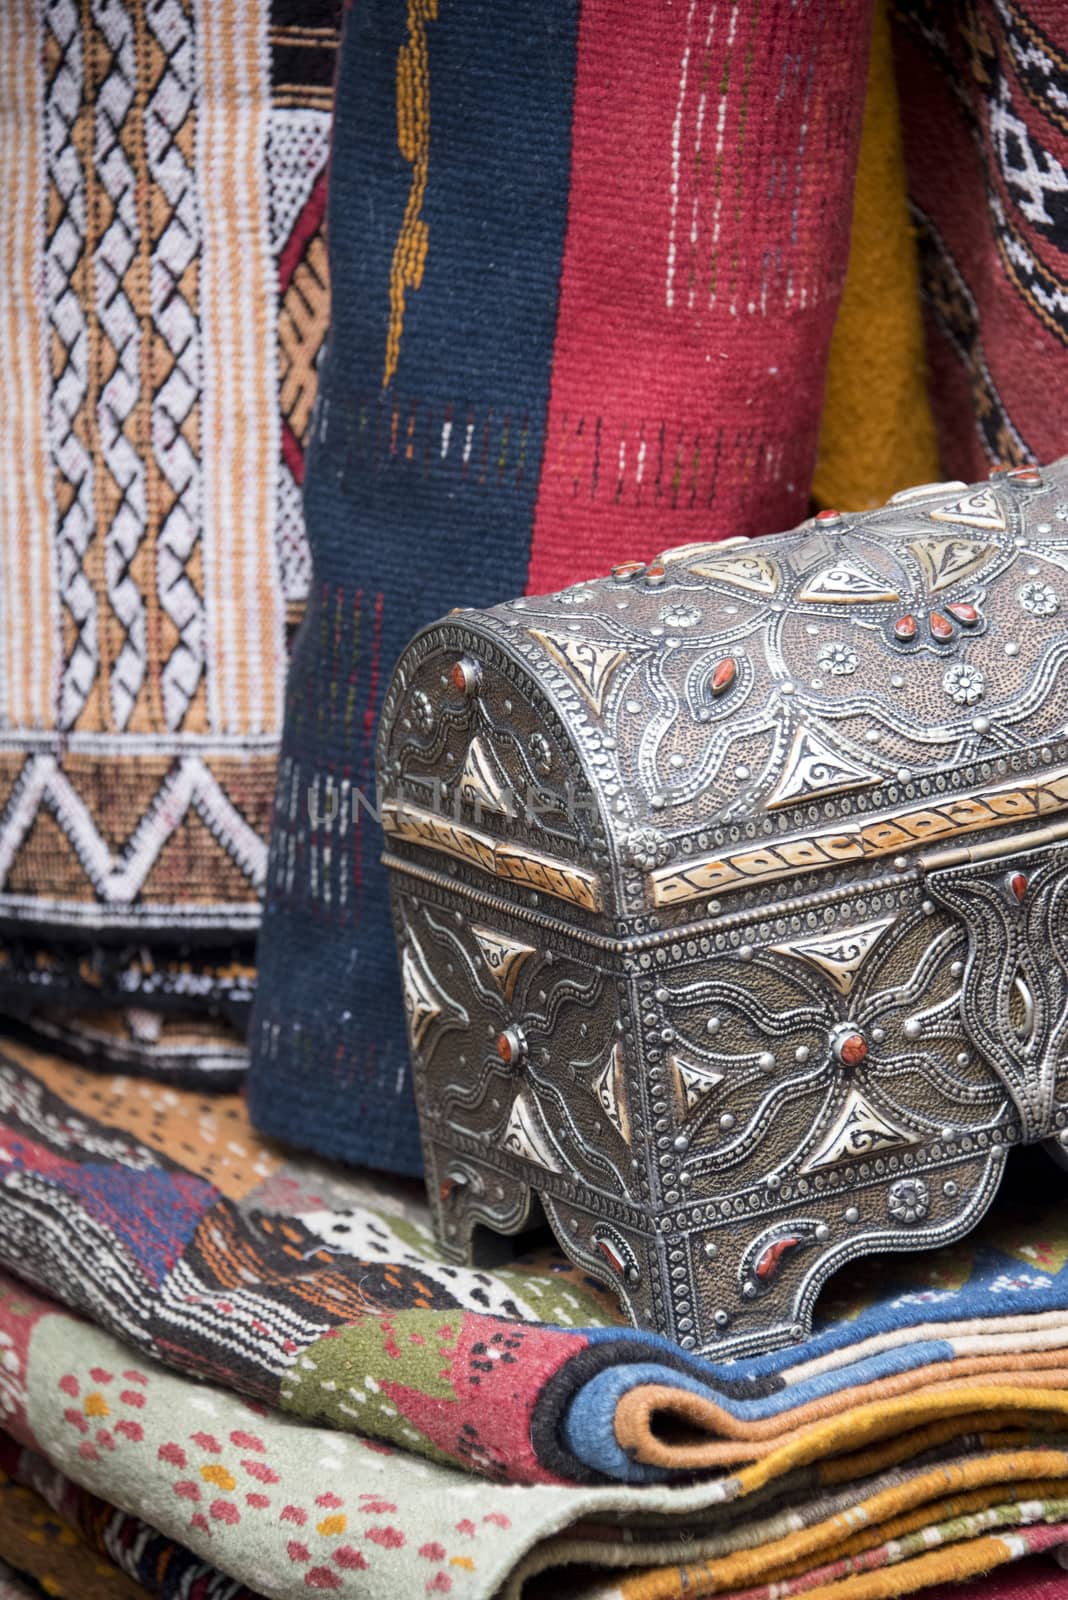 Essaouria, Morocco - September 2017: Ornate silver trinket box with colorful textiles on sale in a Moroccan Market
